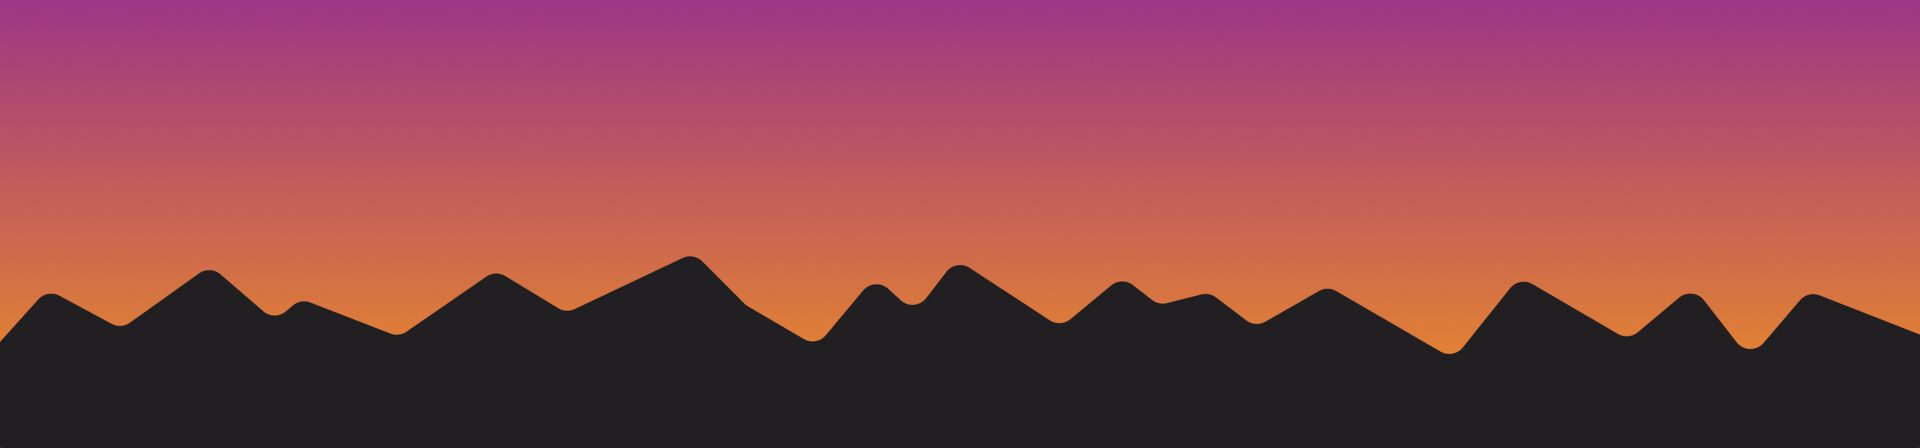 background image of a mountain range with sunset